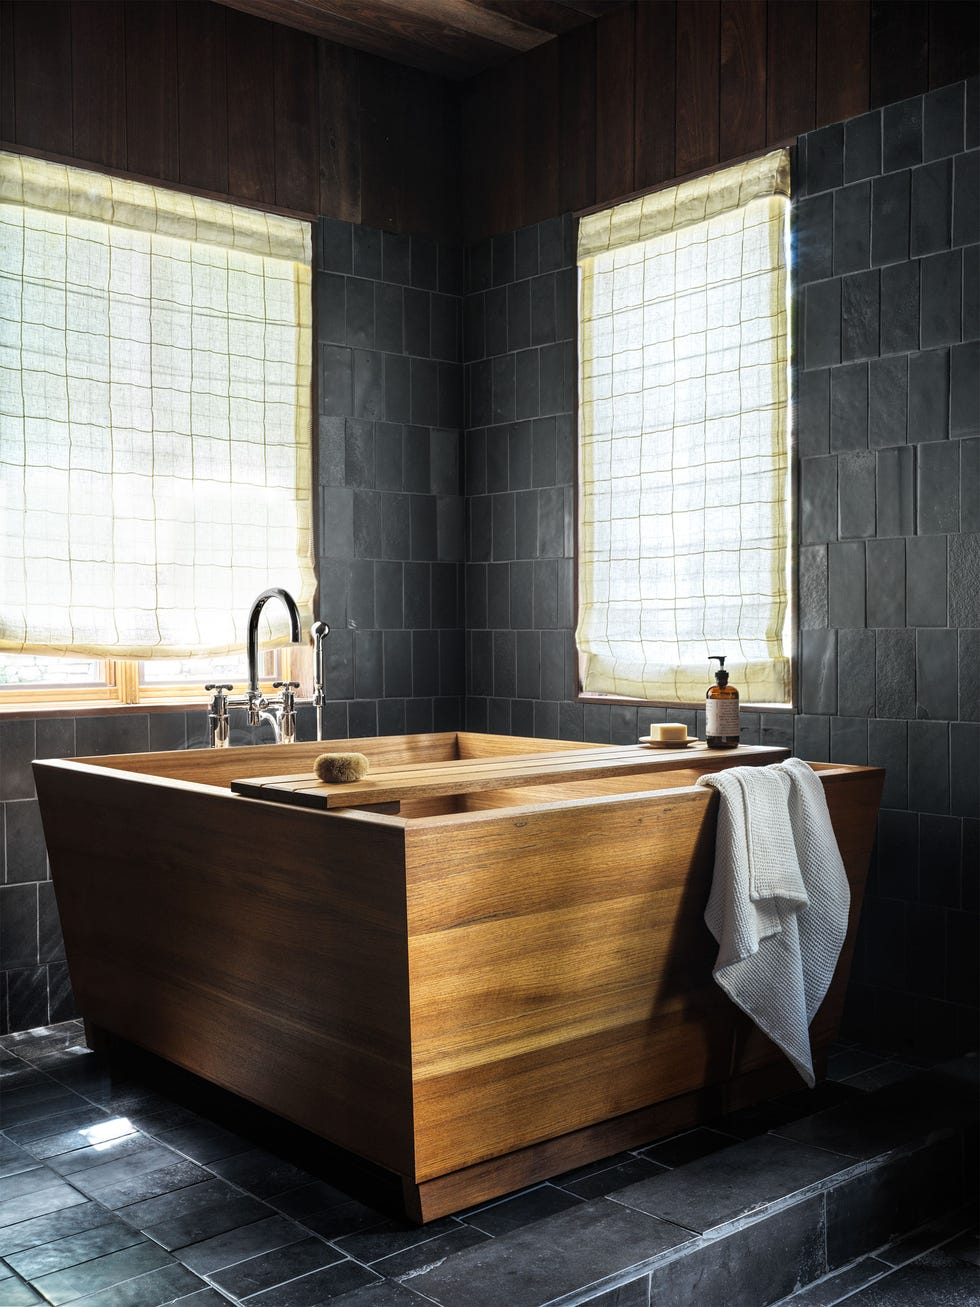 a bathroom has black limestone tiles on the floor and walls, two windows with linen roman shades in a small square pattern, a deep square cedar tub with a wooden tray holding soap and a dispenser, chrome fittings